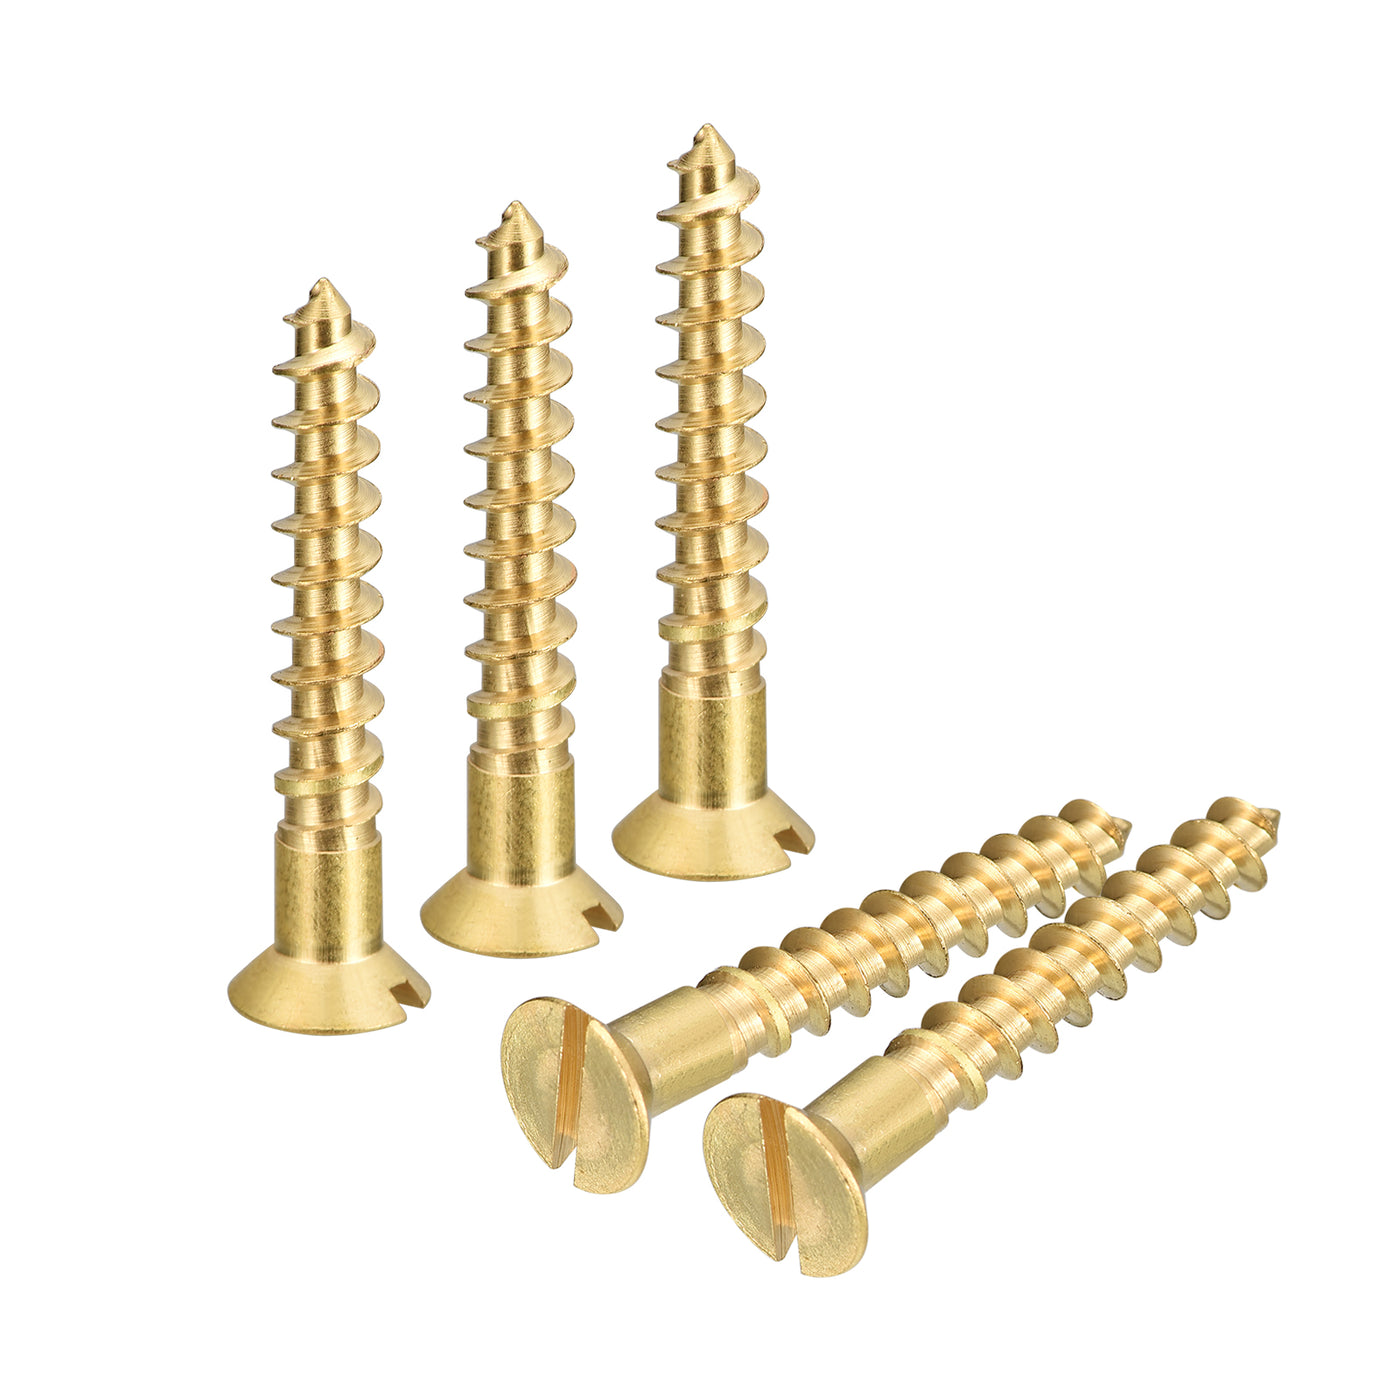 uxcell Uxcell 20Pcs M6 x 40mm Brass Slotted Drive Flat Head Wood Screws Self Tapping Screw